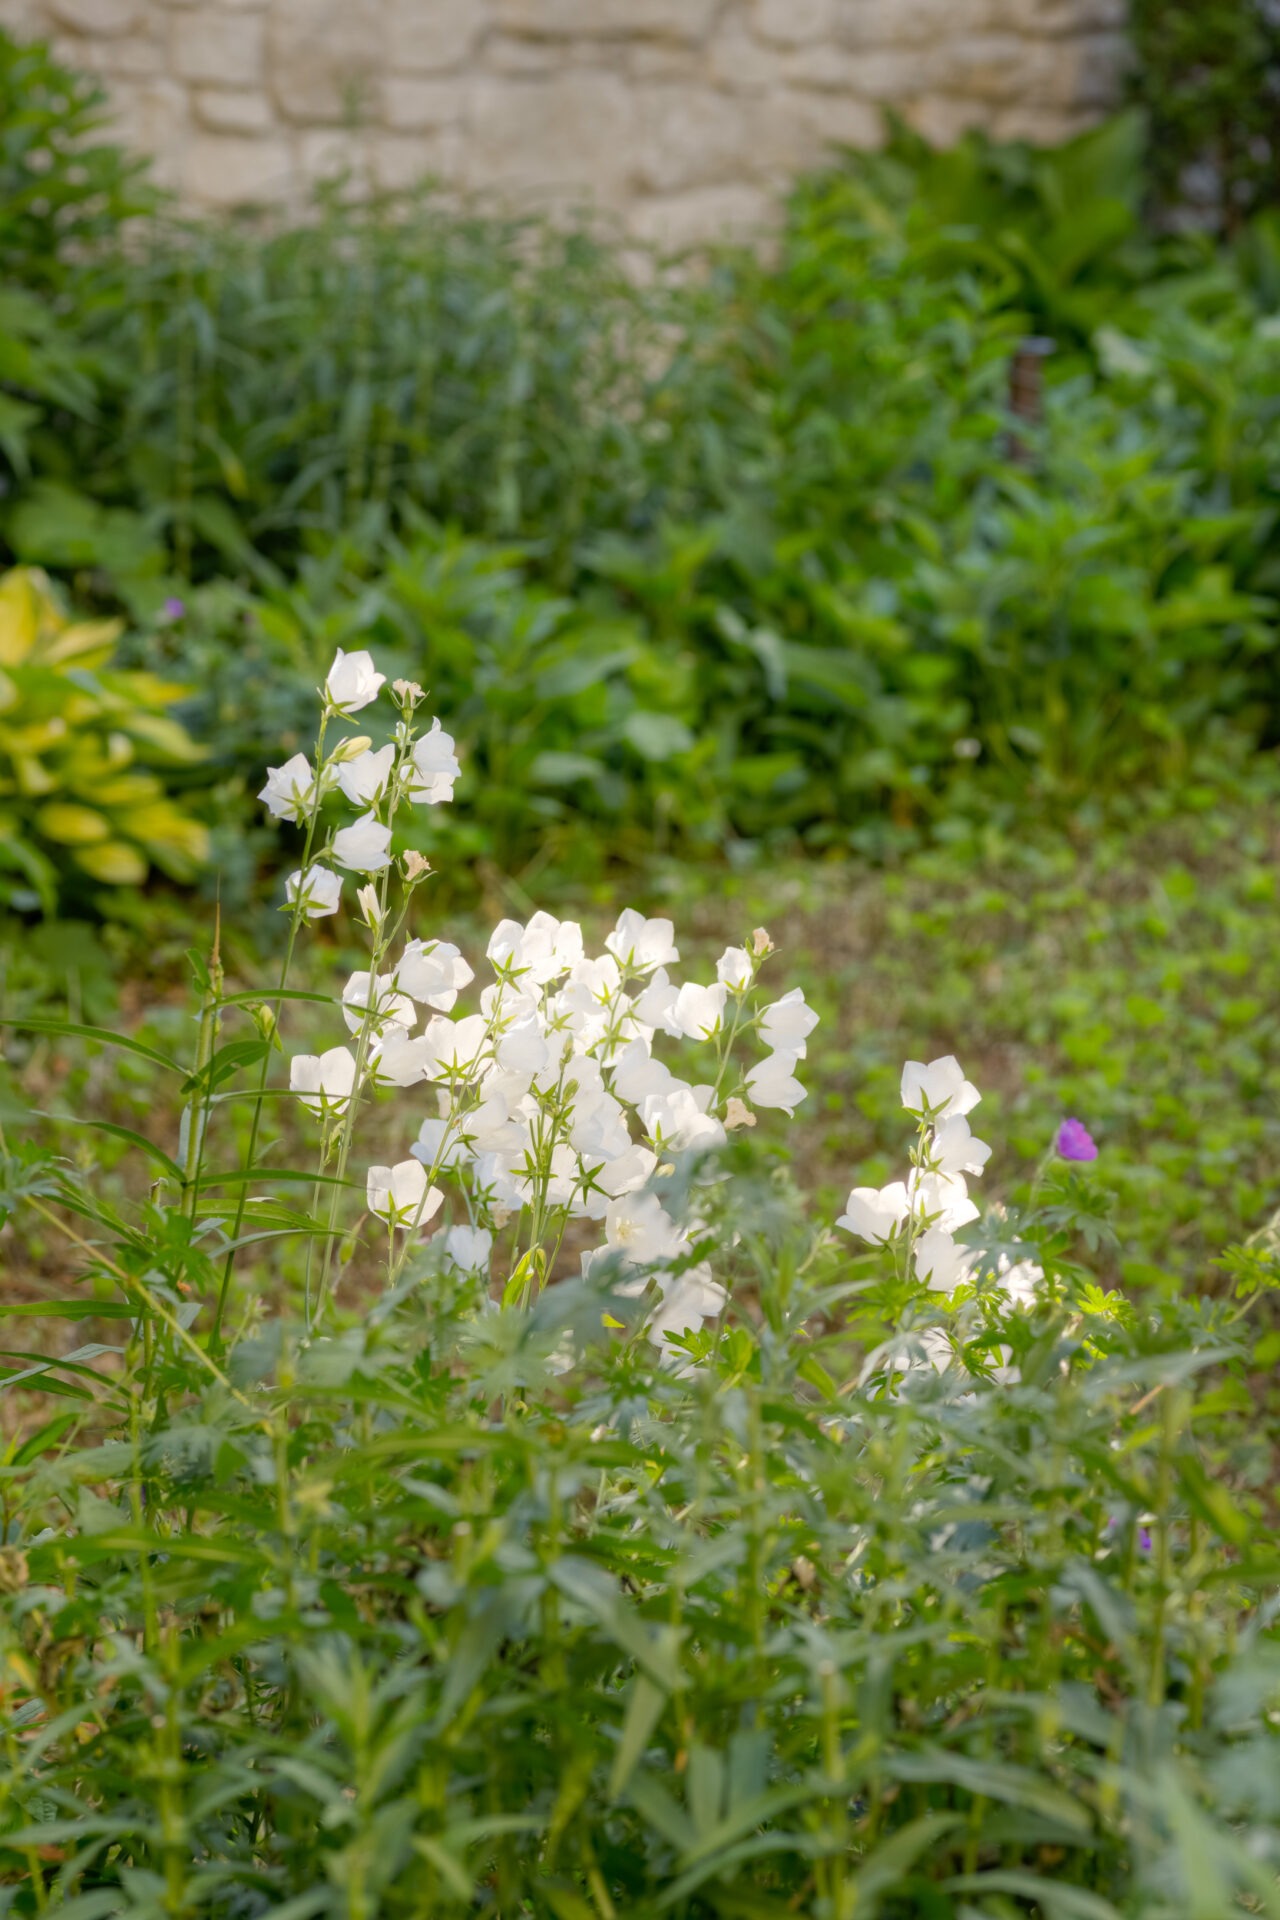 A group of white bell-shaped flowers in focus, with lush green foliage in a garden. A stone wall and various green plants are in the background.